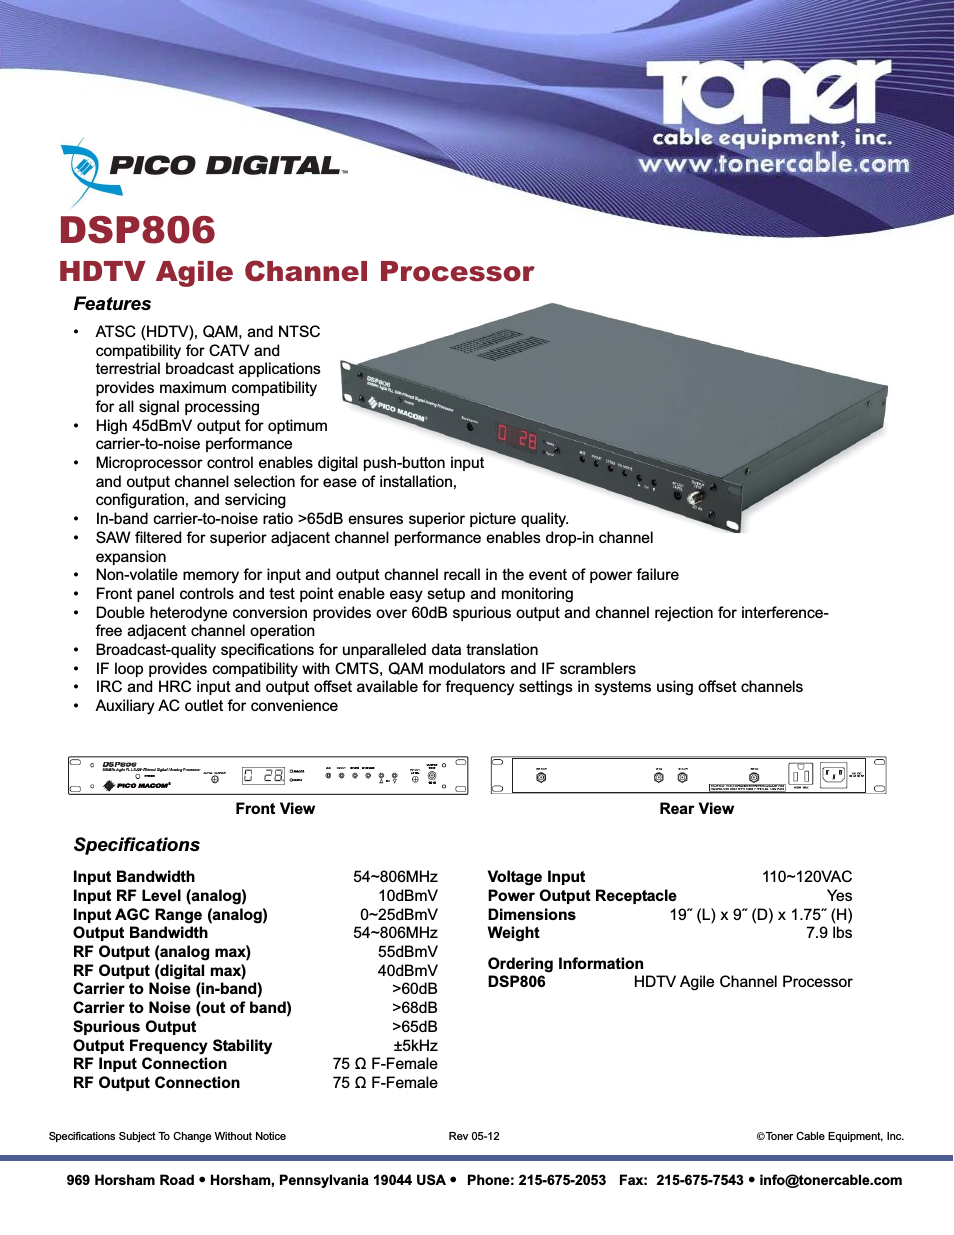 DSP806 806 MHz Agile PLL SAW-Filtered Digital Analog Channel Processor